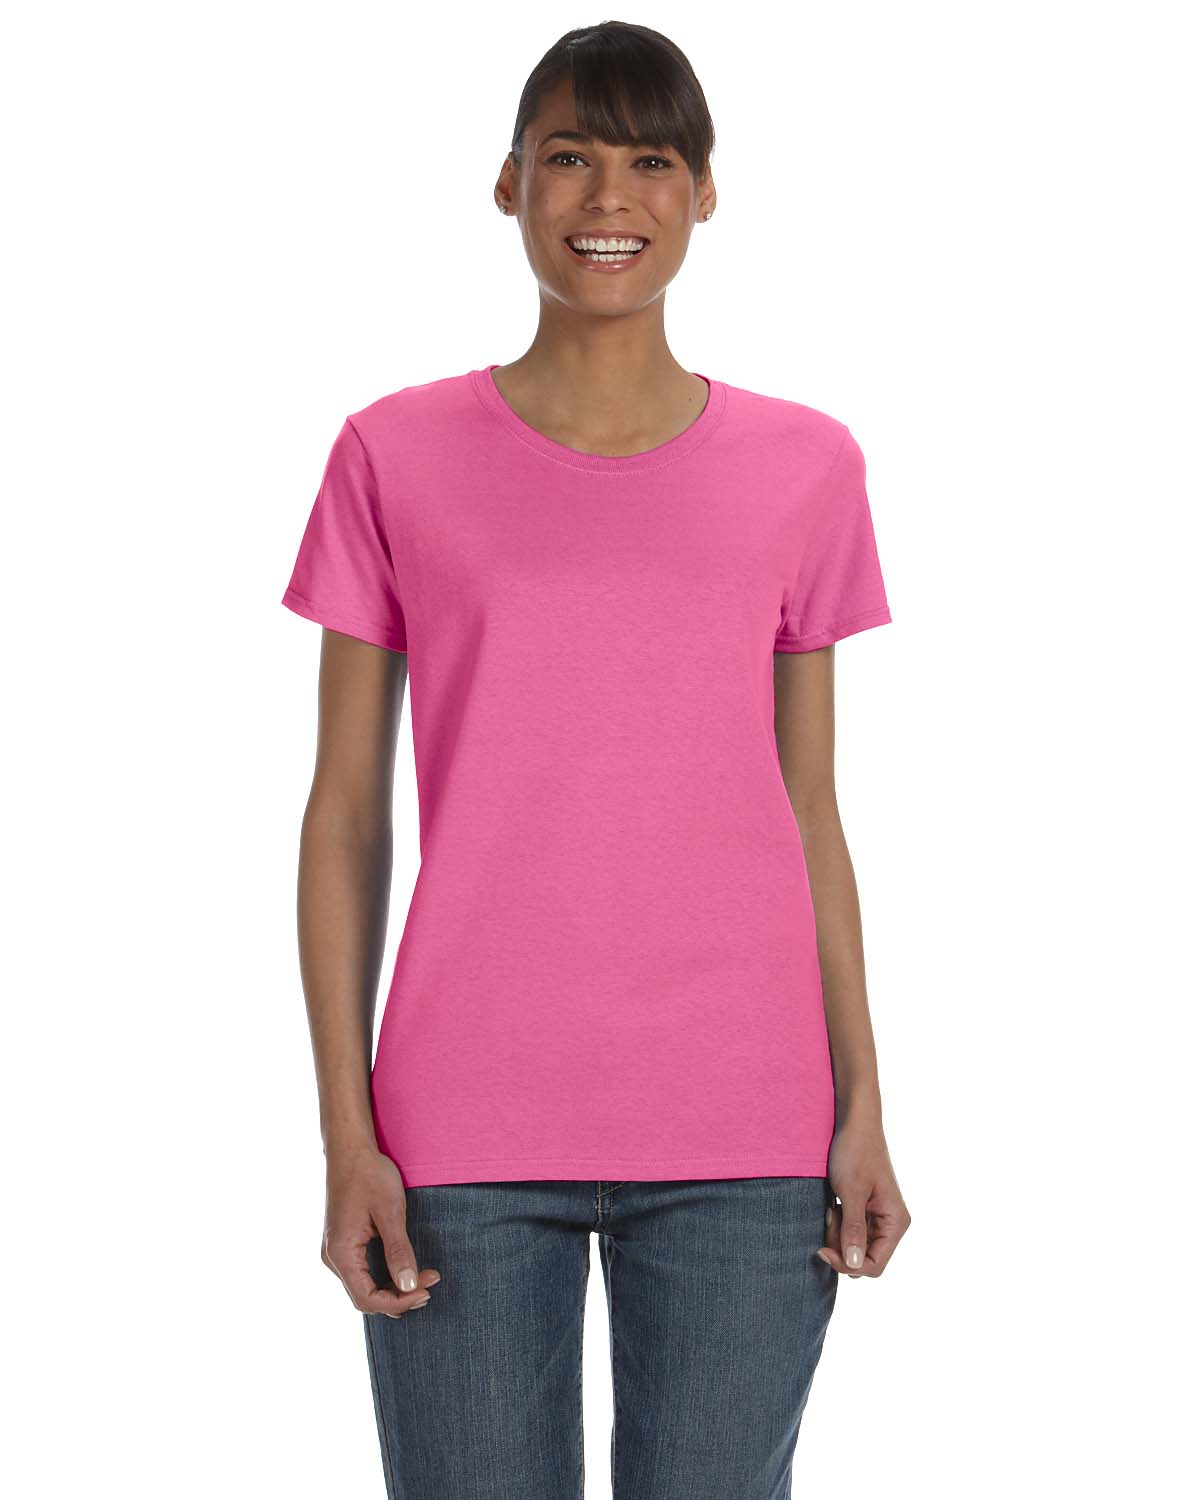 Gildan Women Pink T-shirts Value Pack Shirts for Women - Single or Pack of 6 or Pack of 12 Cute Casual Plain Pink Shirts for Women Gildan T-shirts for